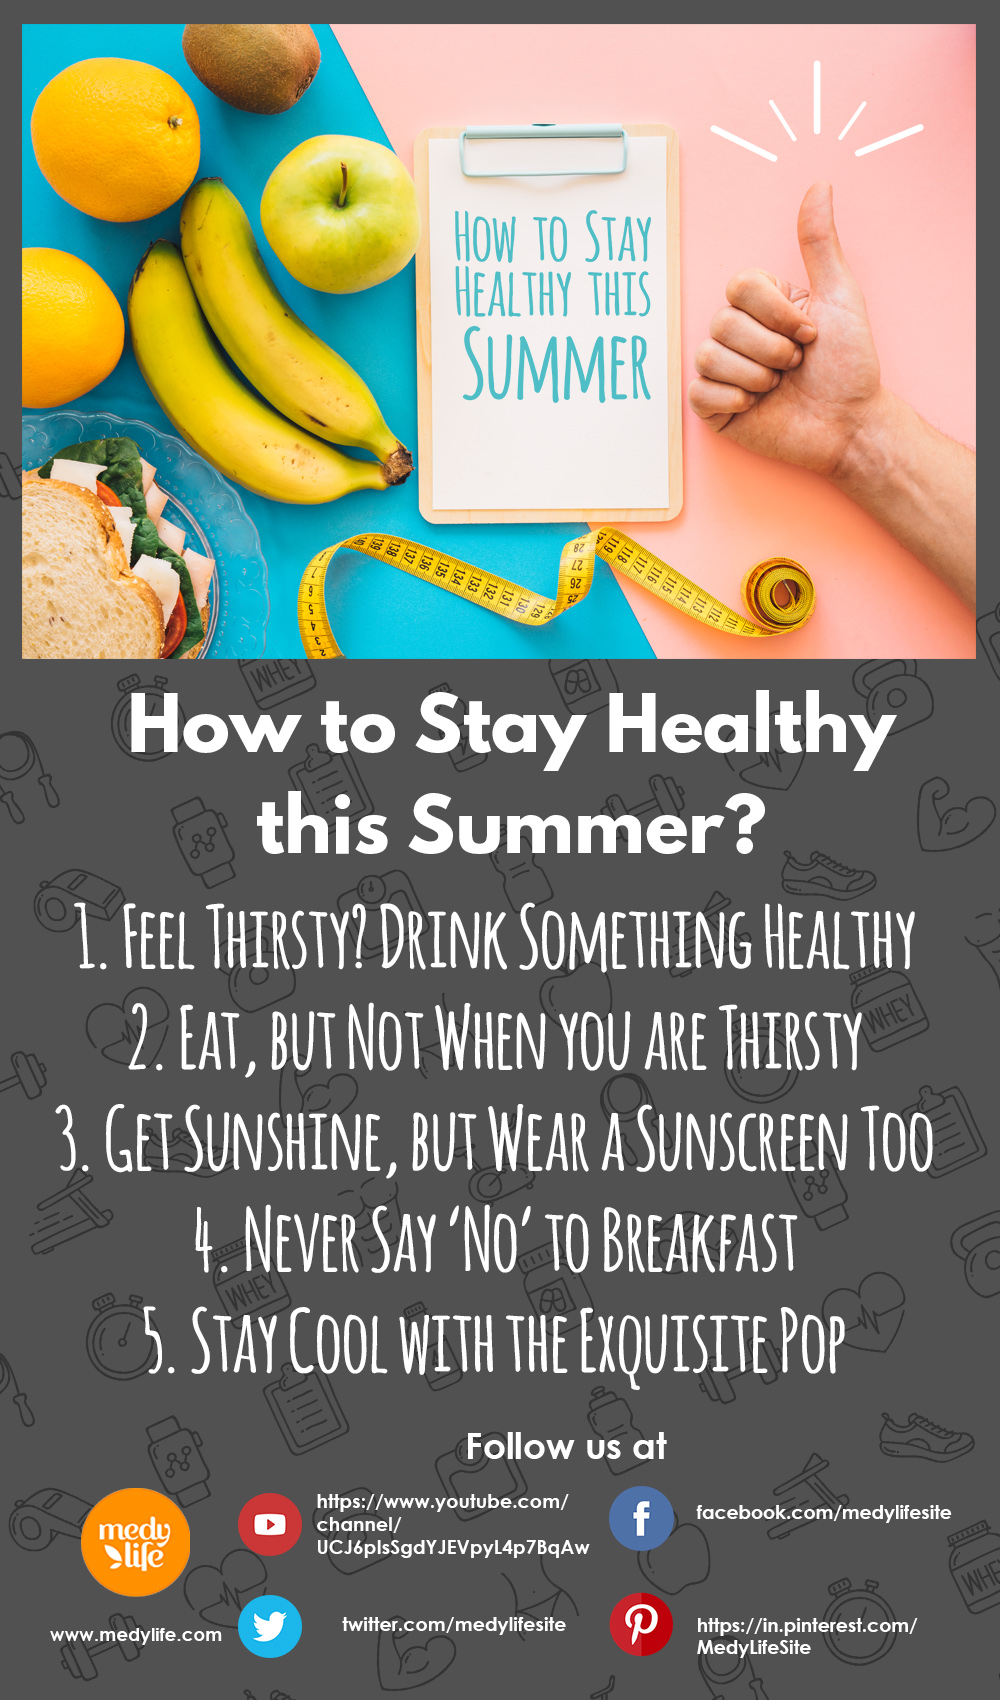 How to Stay Healthy this Summer INFO